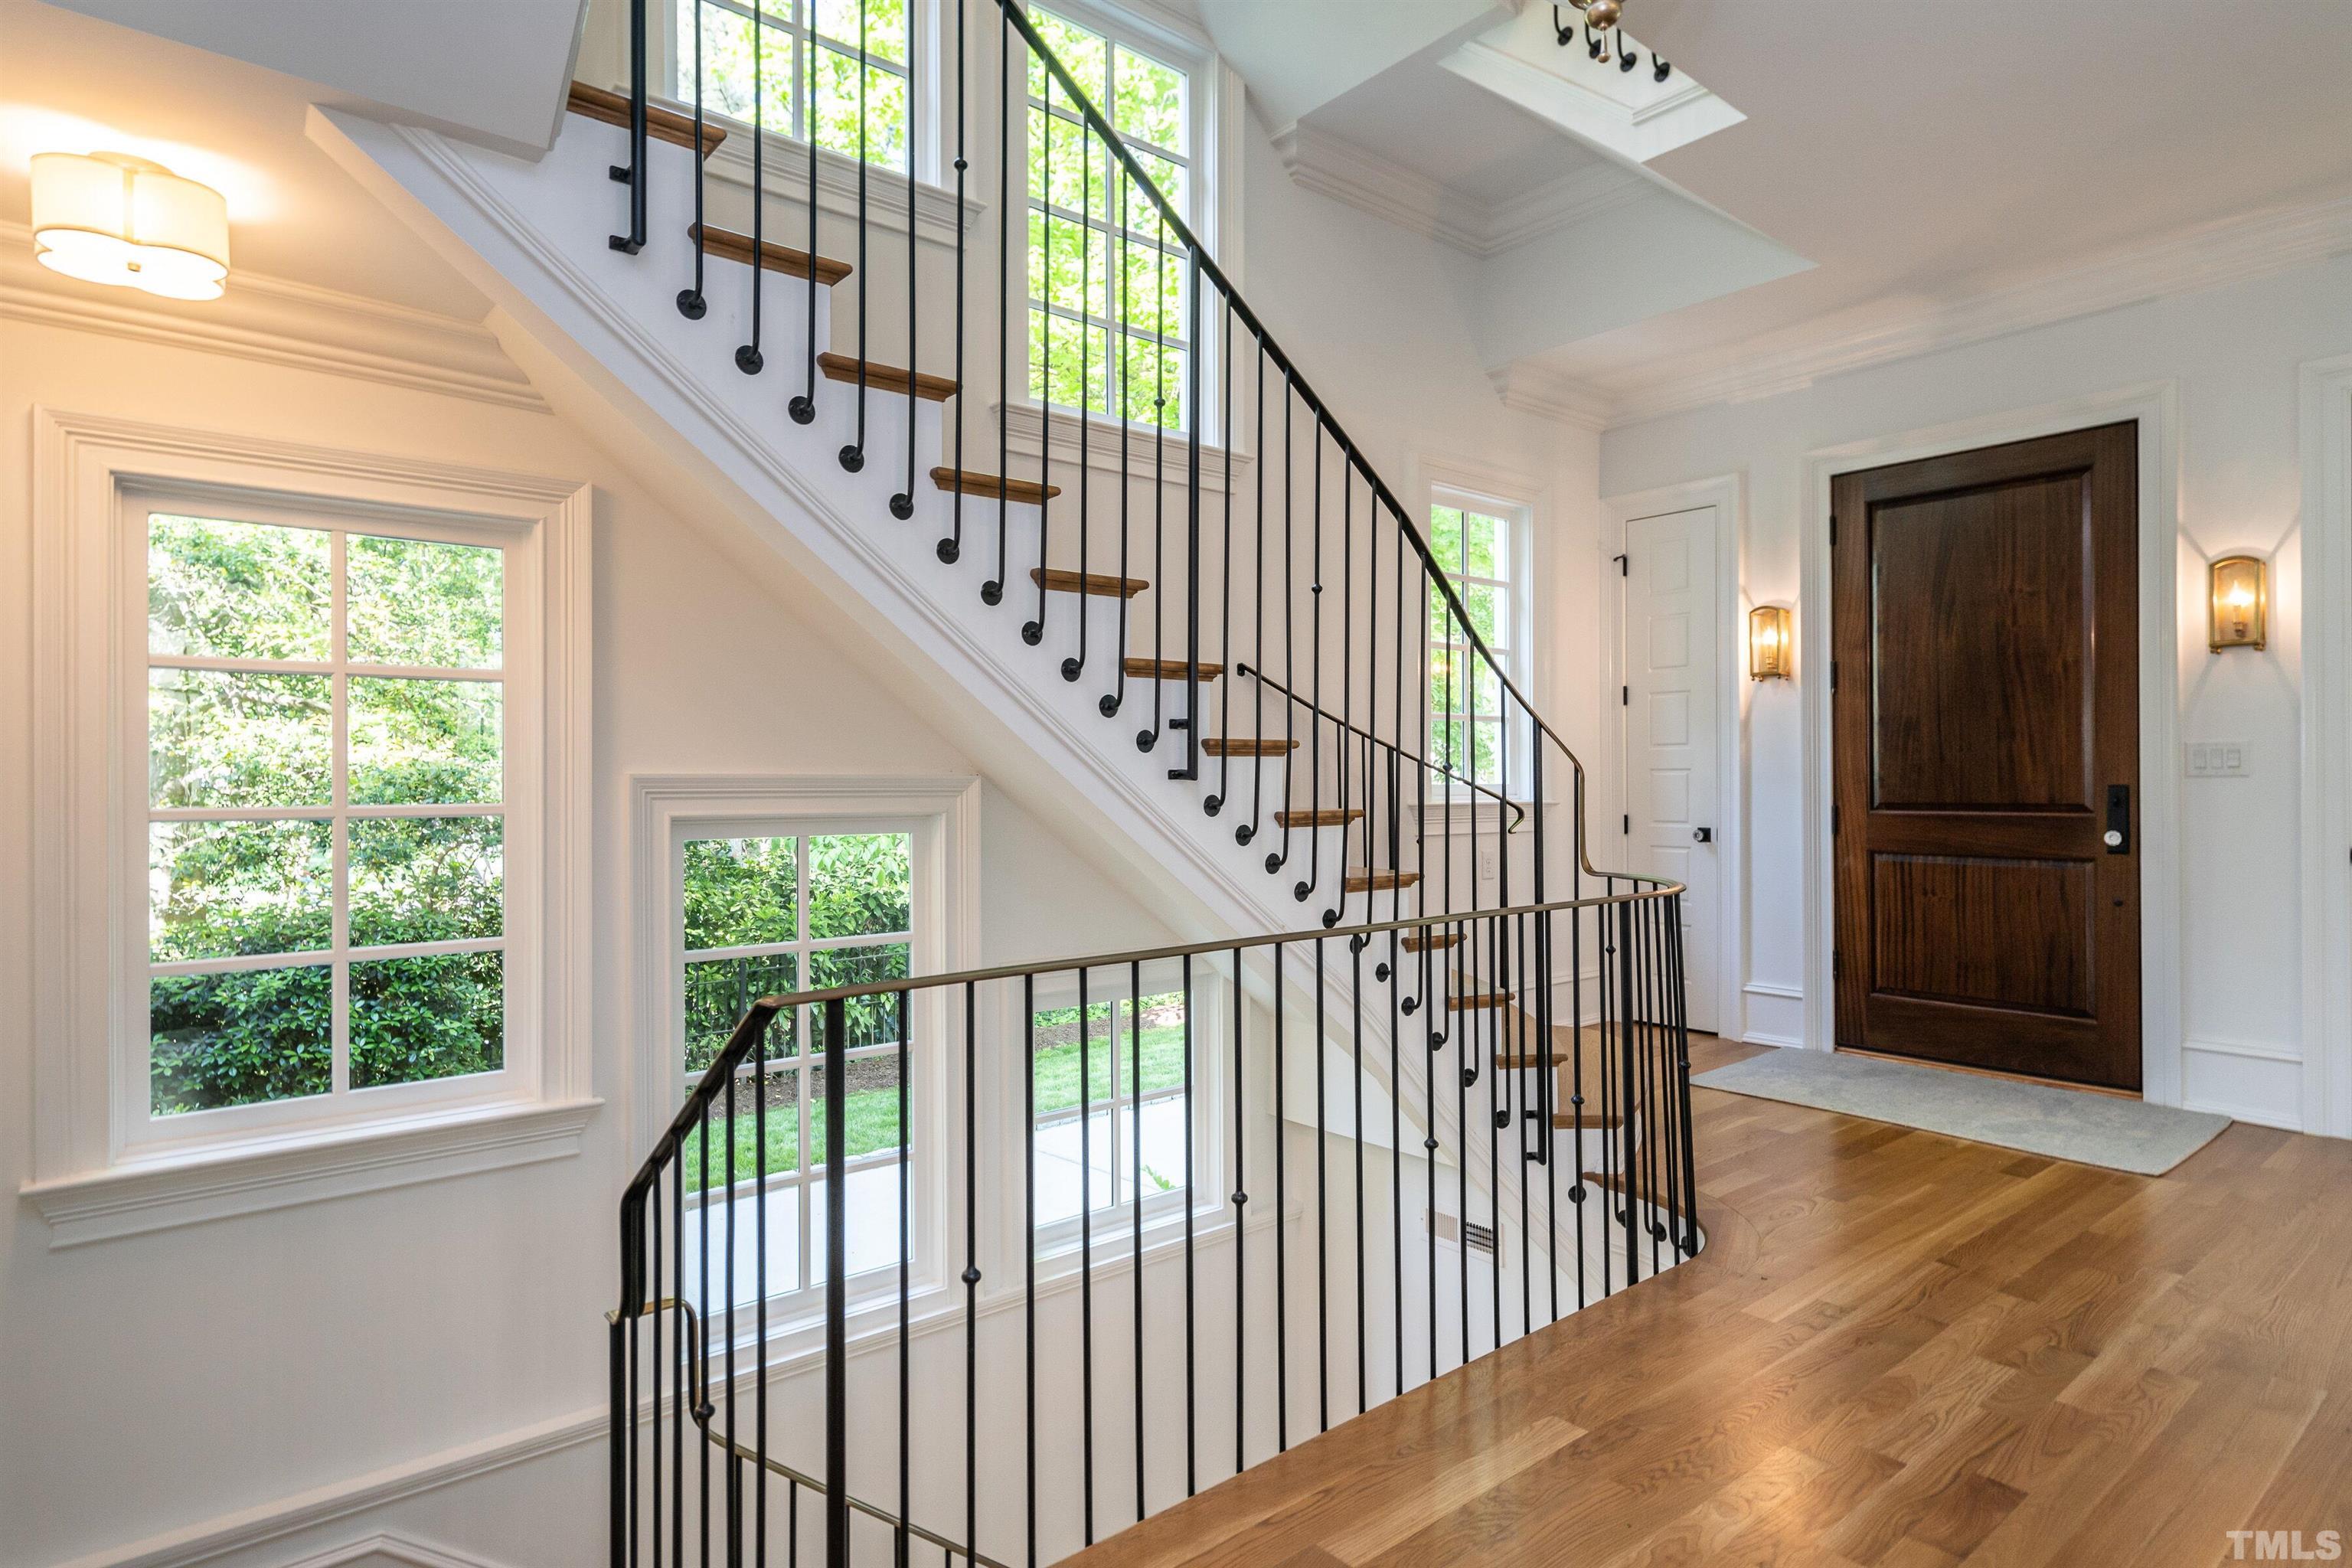 Refined yet sturdy, custom iron railing embellishes a graceful staircase.